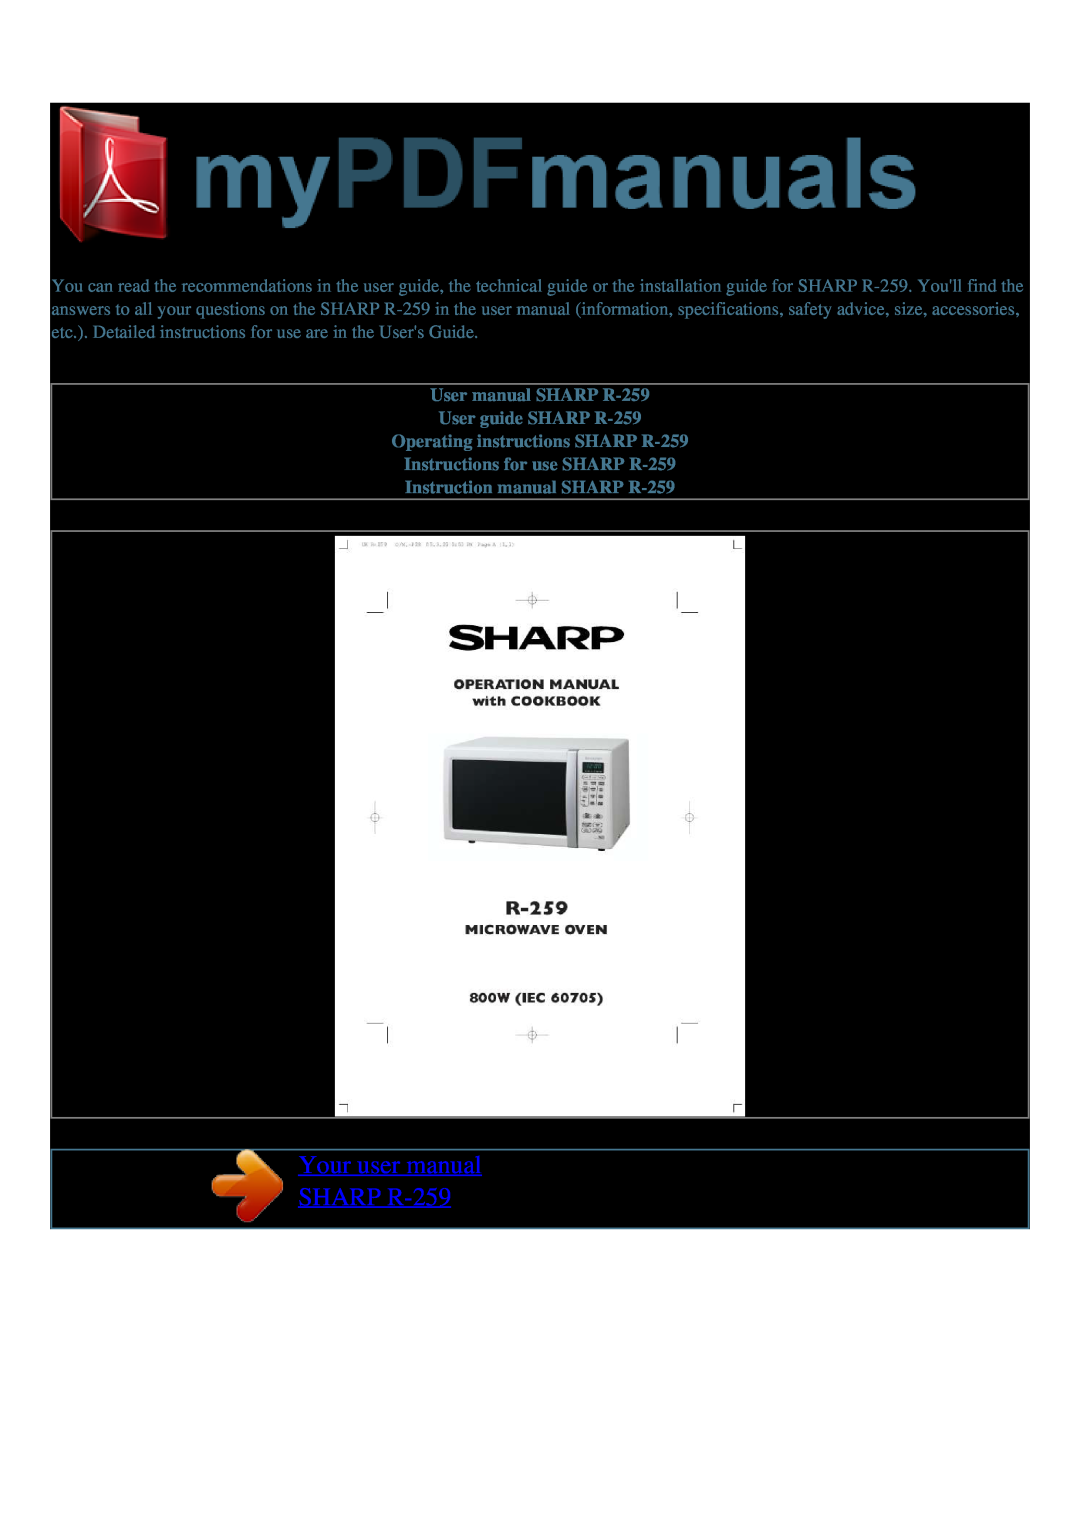 Sharp R-259 operation manual OPERATION MANUAL with COOKBOOK, Microwave Oven, 800W IEC 